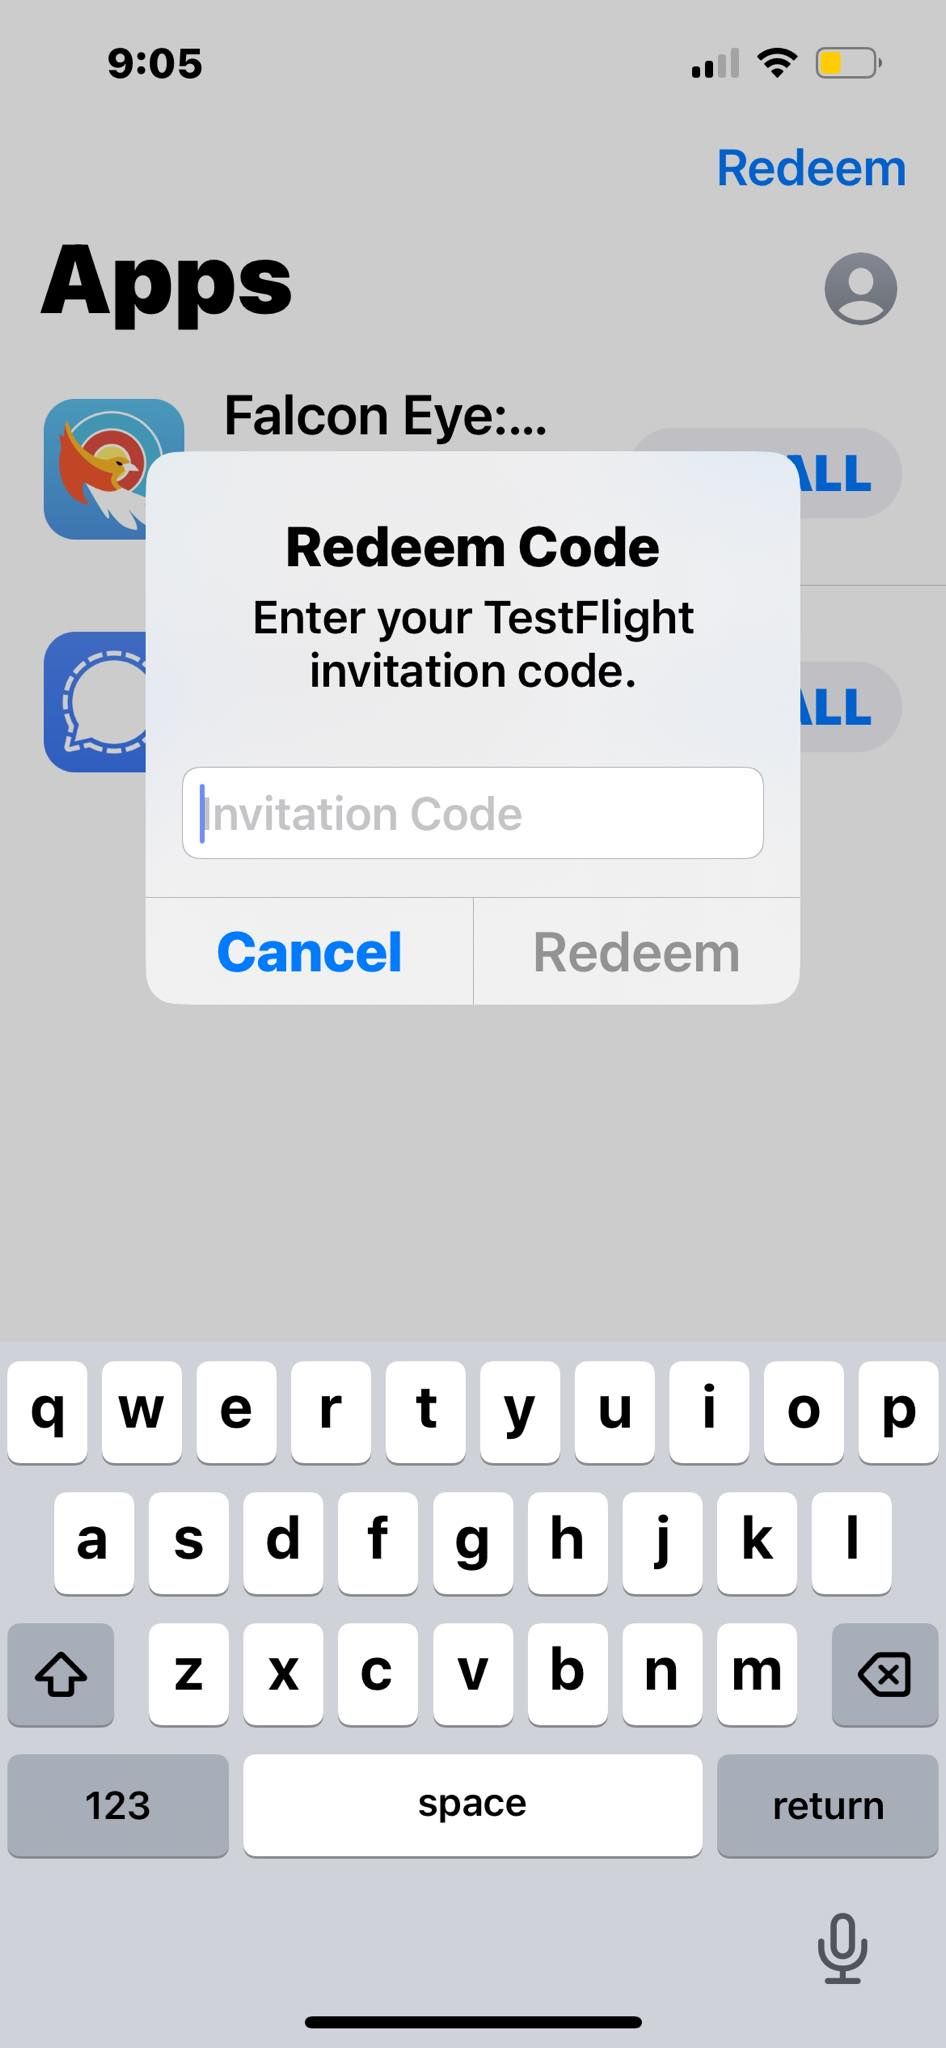 How to Use TestFlight to Beta Test Apps on Your iPhone or iPad